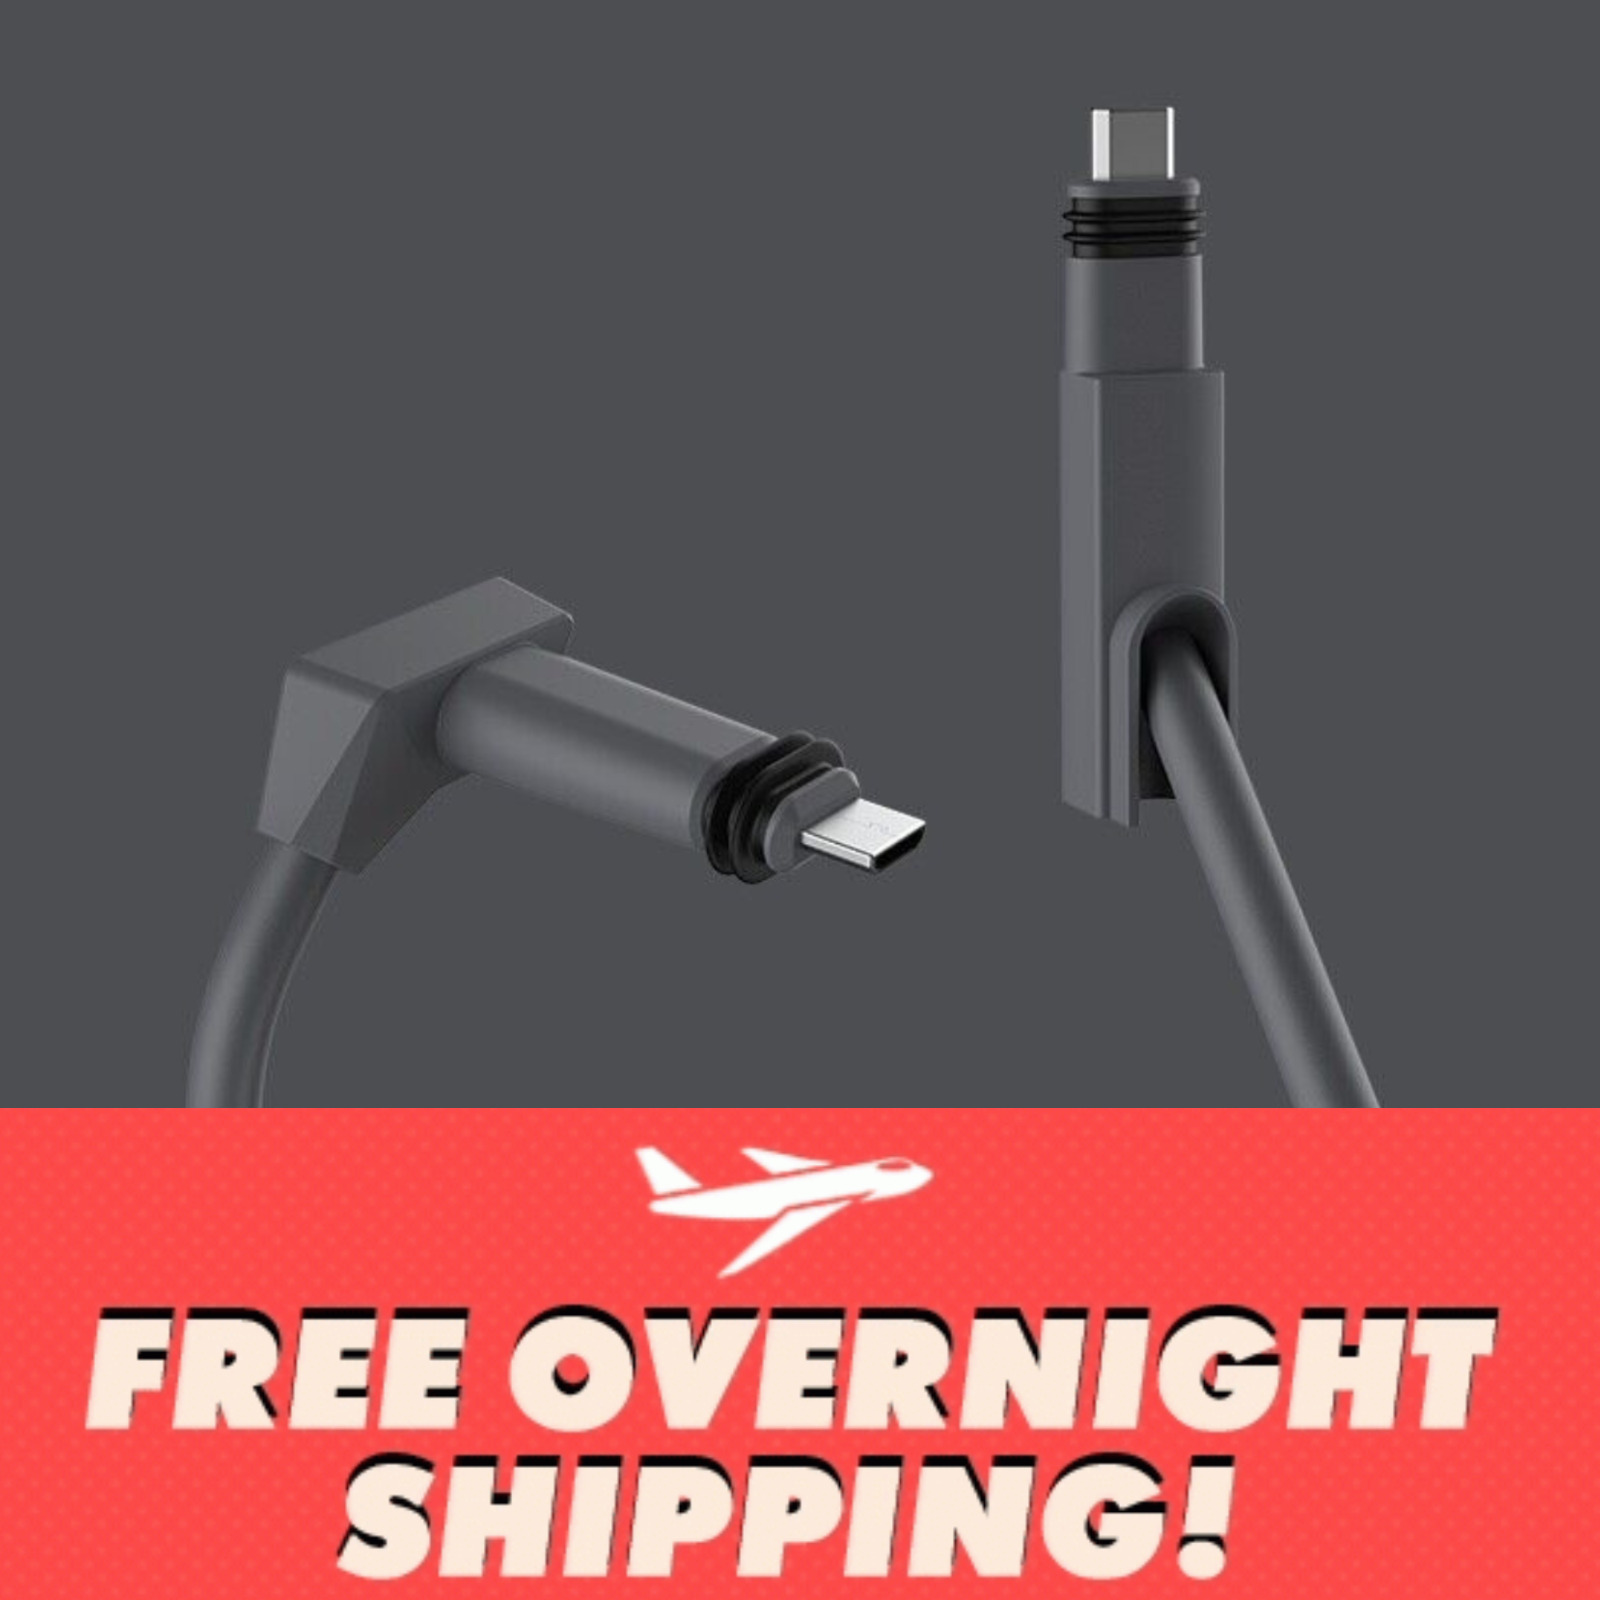 StarLink 75ft  V2 Cable FREE OVERNIGHT SHIPPING. BUY TODAY GET IT TOMMOROW